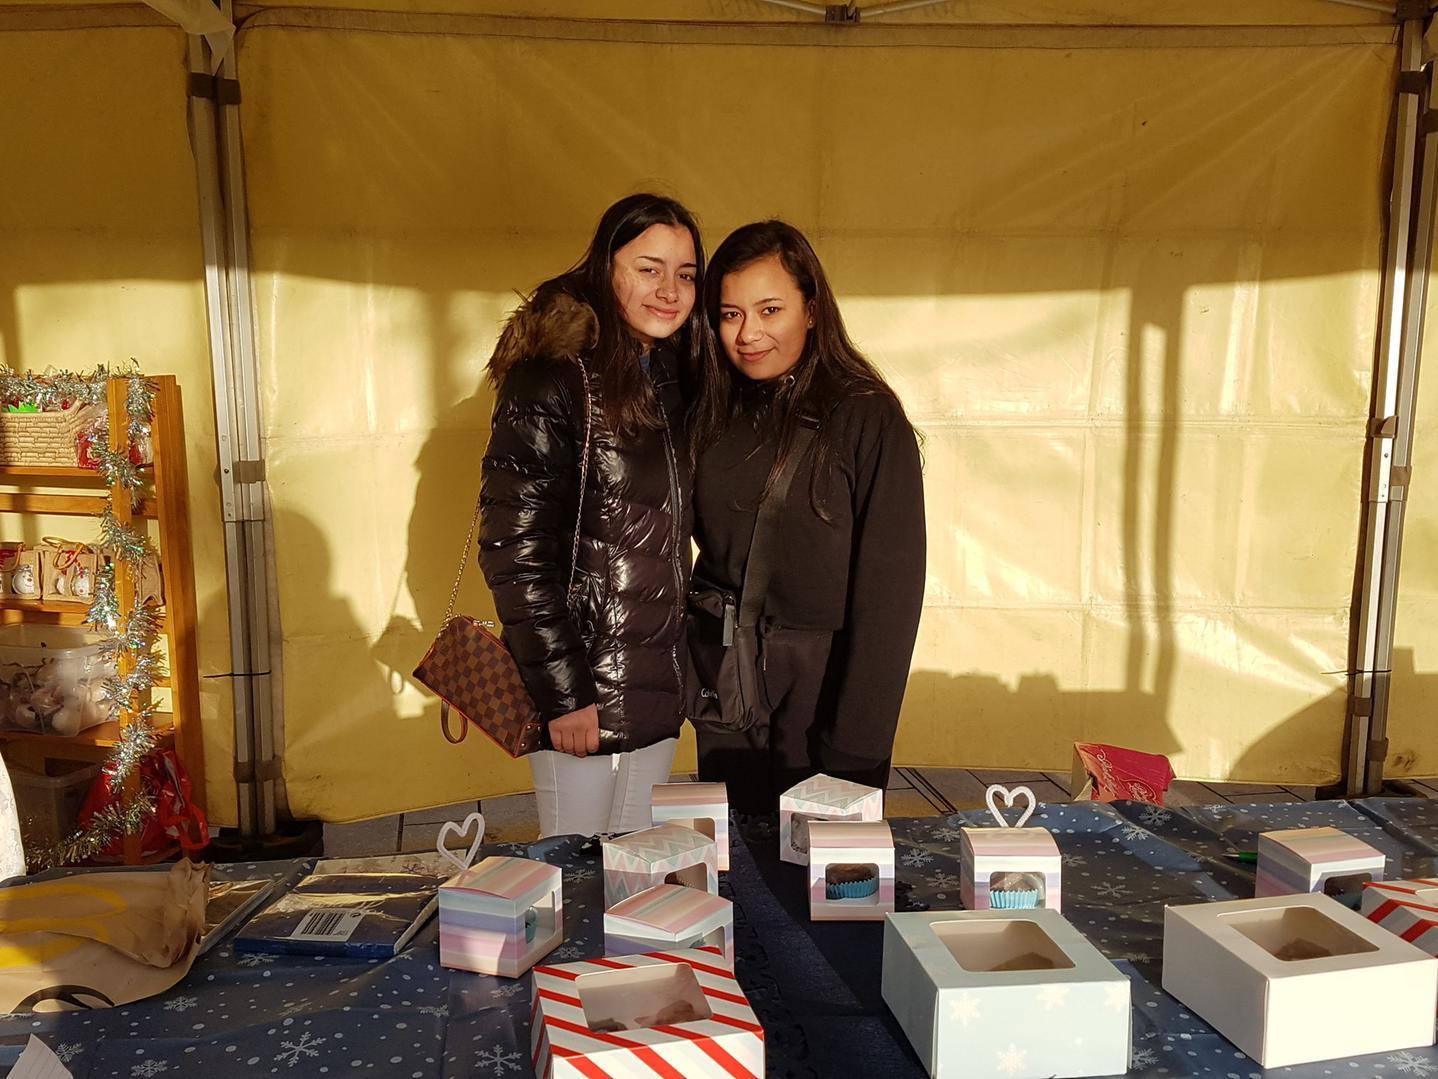 Zahra Haque, 15, (left) was running a bakery stall with the help of her younger sister Shayla, 13, (right). Zahra only started baking in the summer but had an impressive array of cakes on offer. Her mum, Jaylan, said some of her best cakes, in the shape of hippos, had sold out.